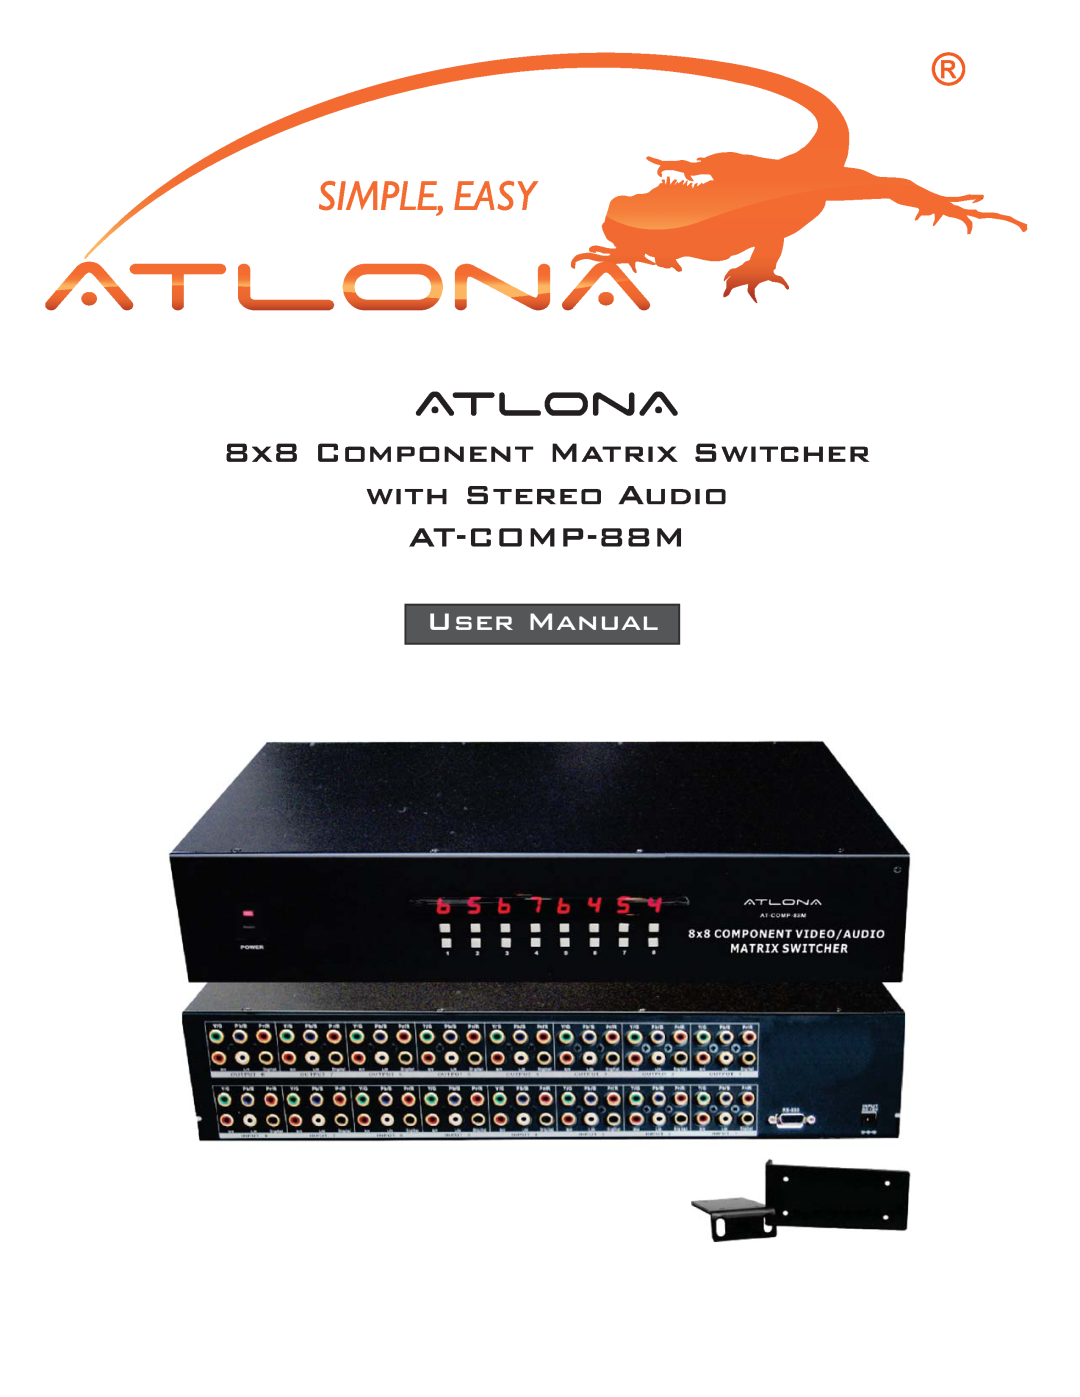 Atlona AT-COMP-88M user manual atlona.com, Atlona 8x8 Component Matrix Switcher with Stereo Audio, Toll free, Local 